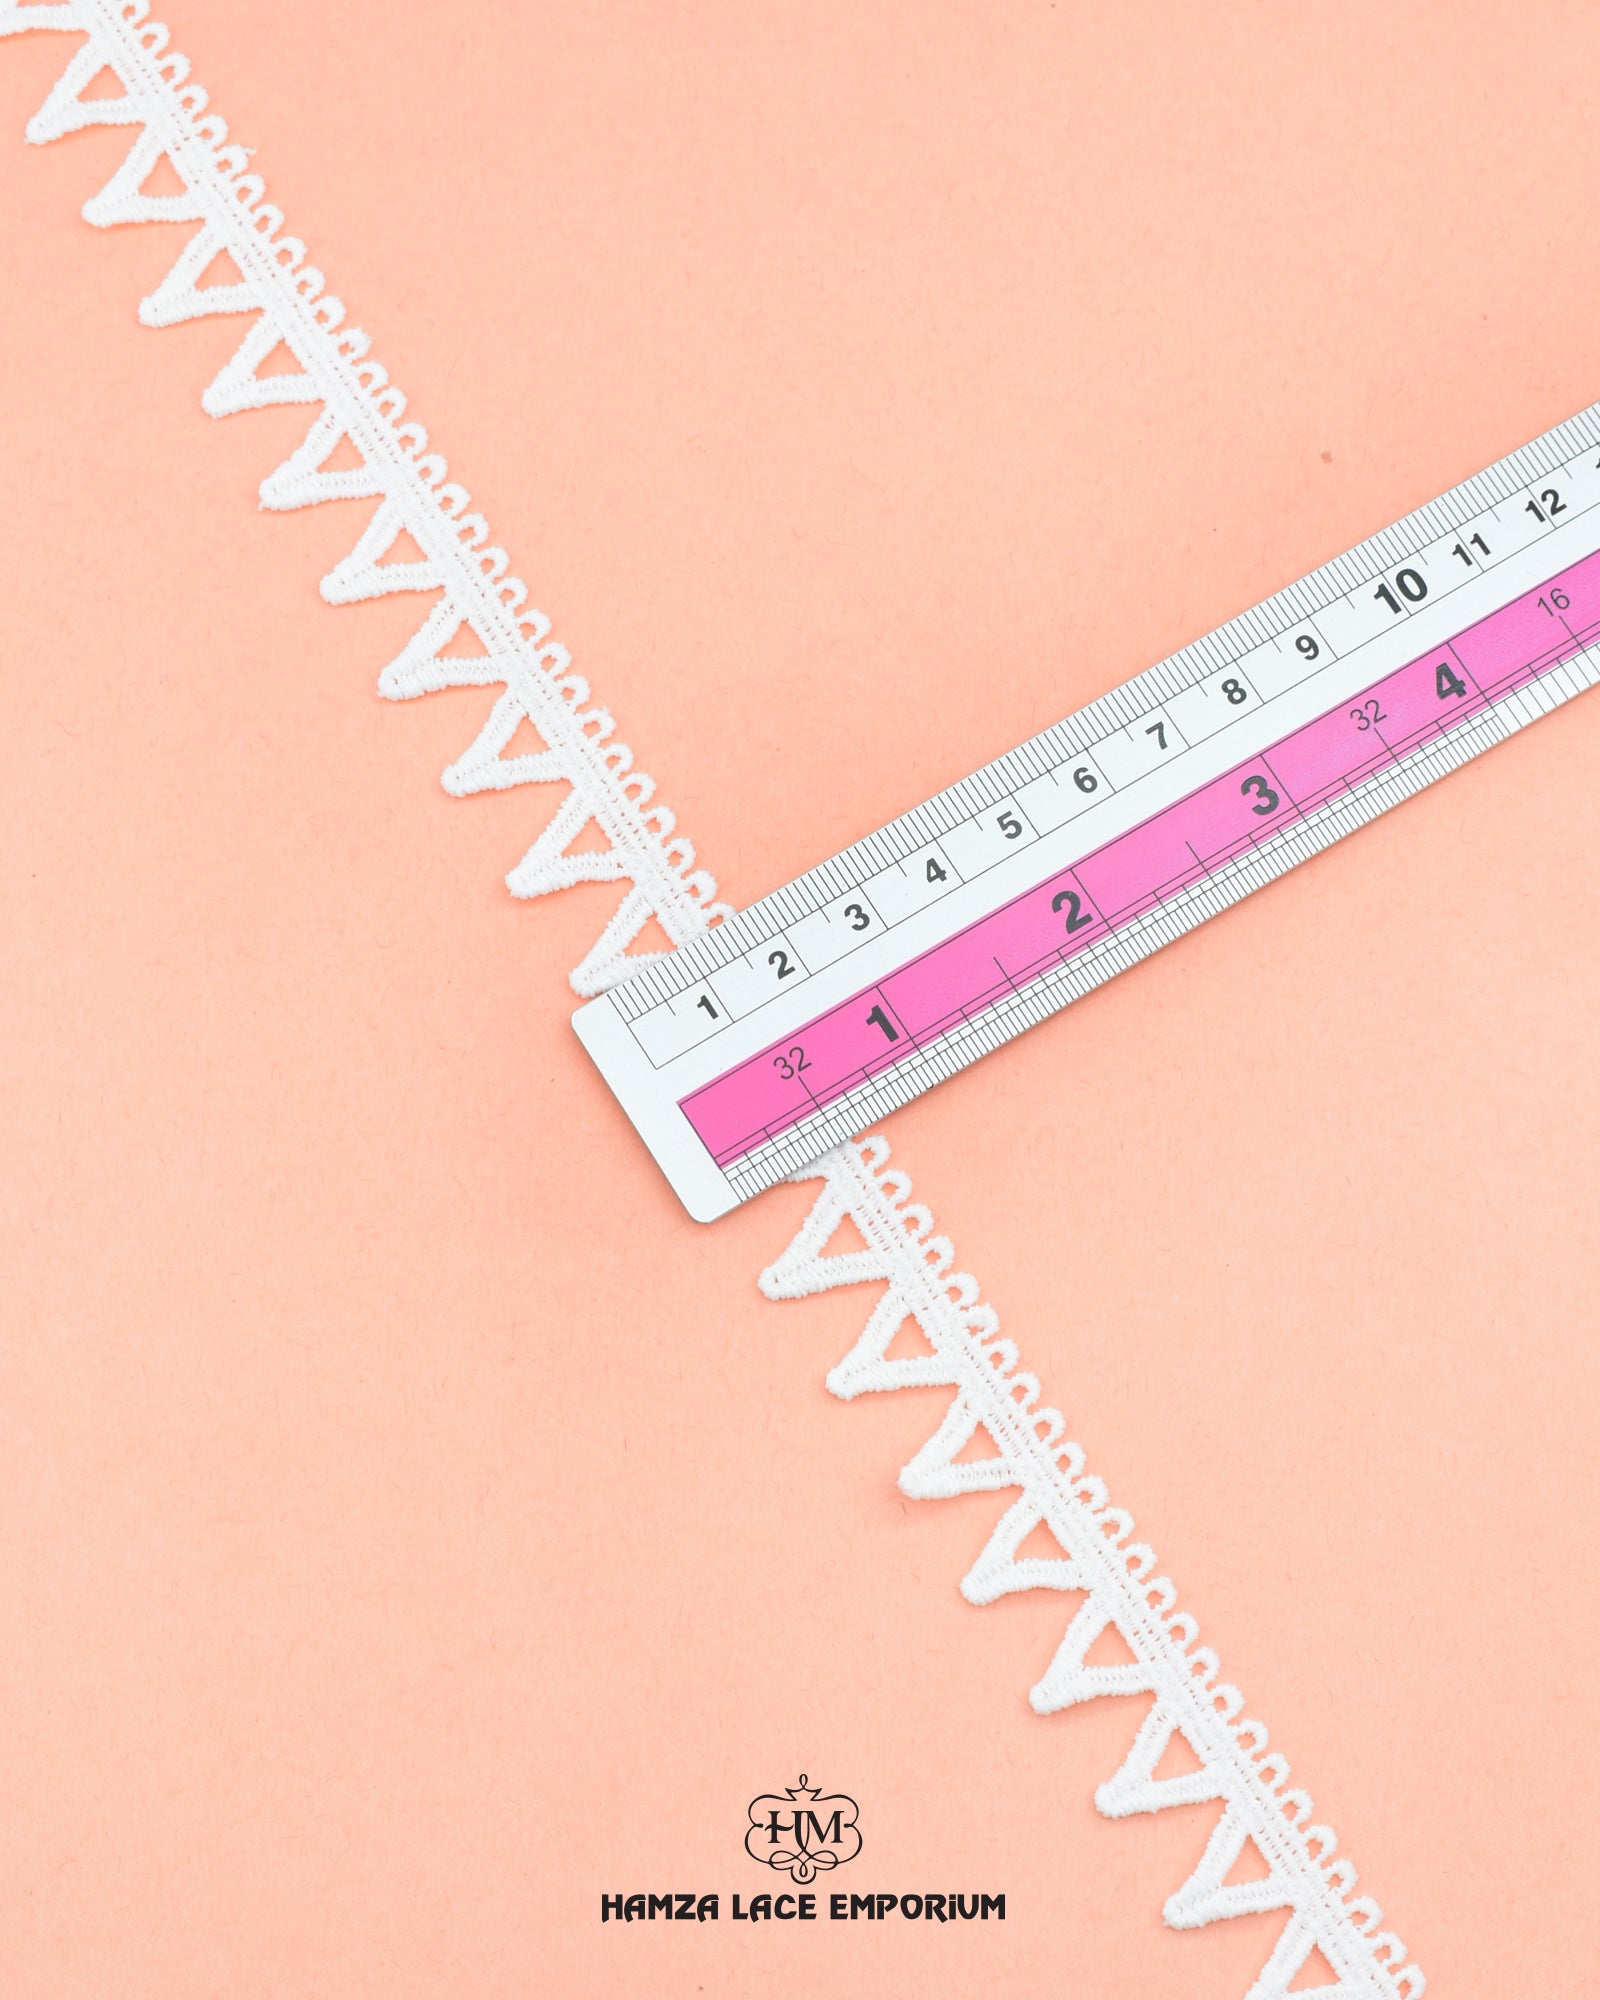 Size of the 'Edging Lace 2999' is shown as '0.75' inches with the help of a ruler